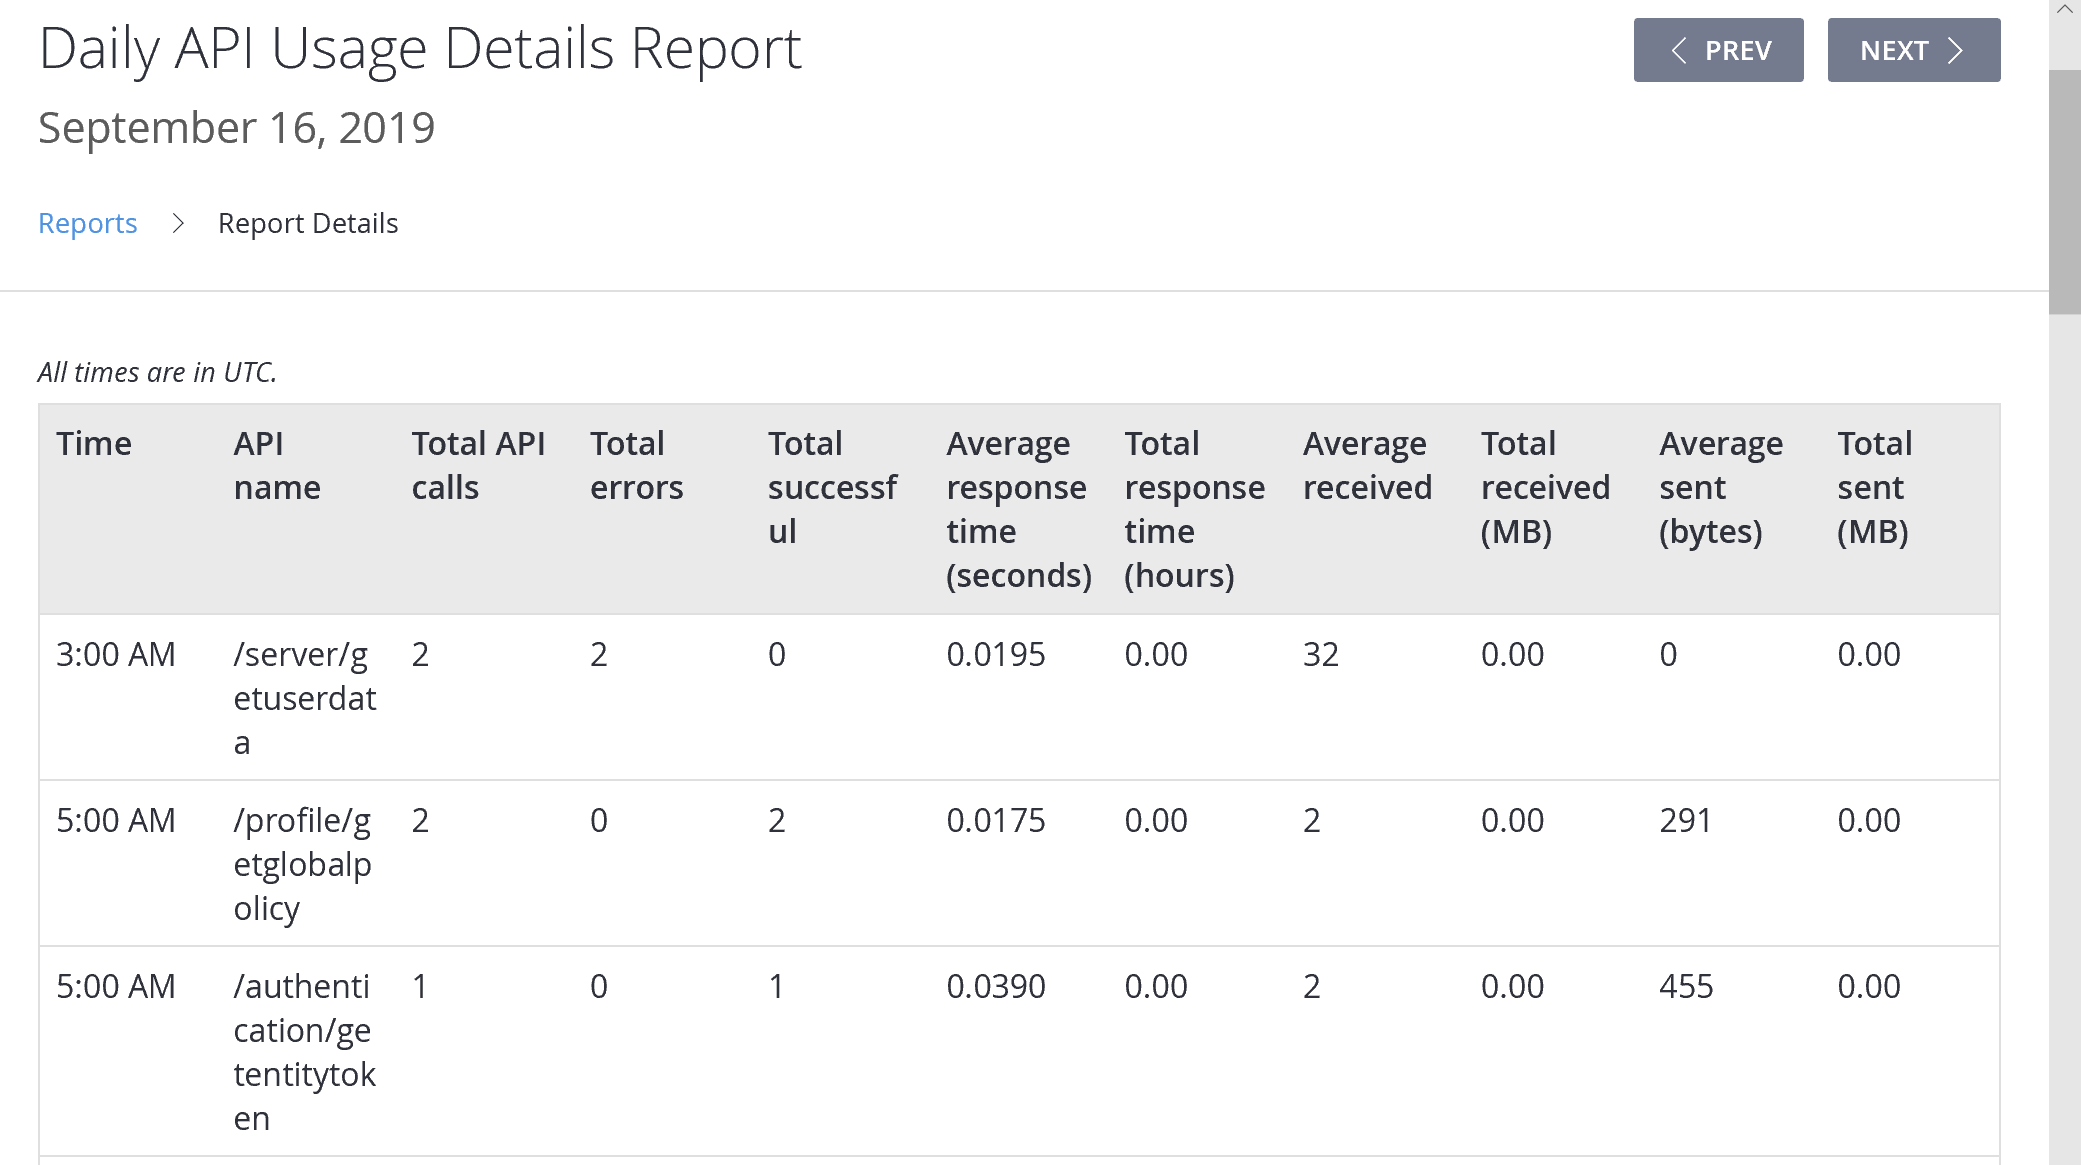 Daily API usage details report table